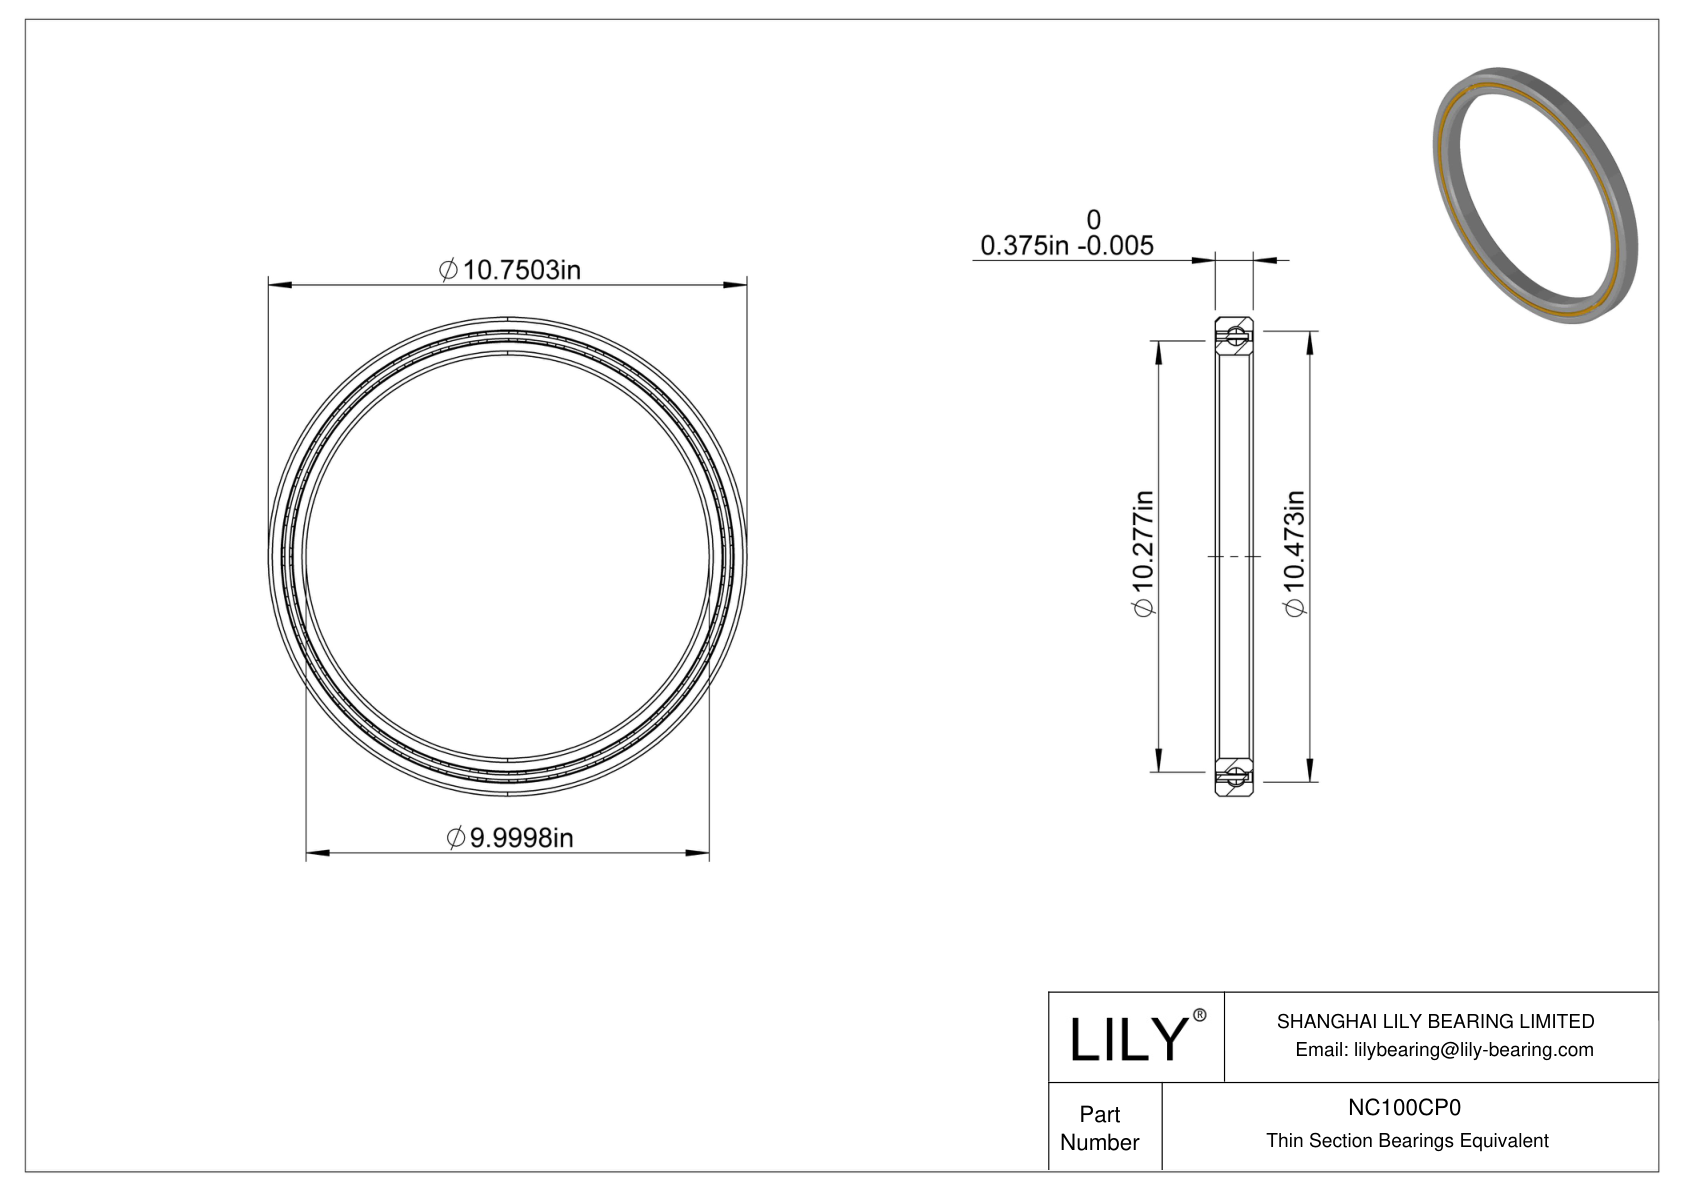 NC100CP0 Constant Section (CS) Bearings cad drawing